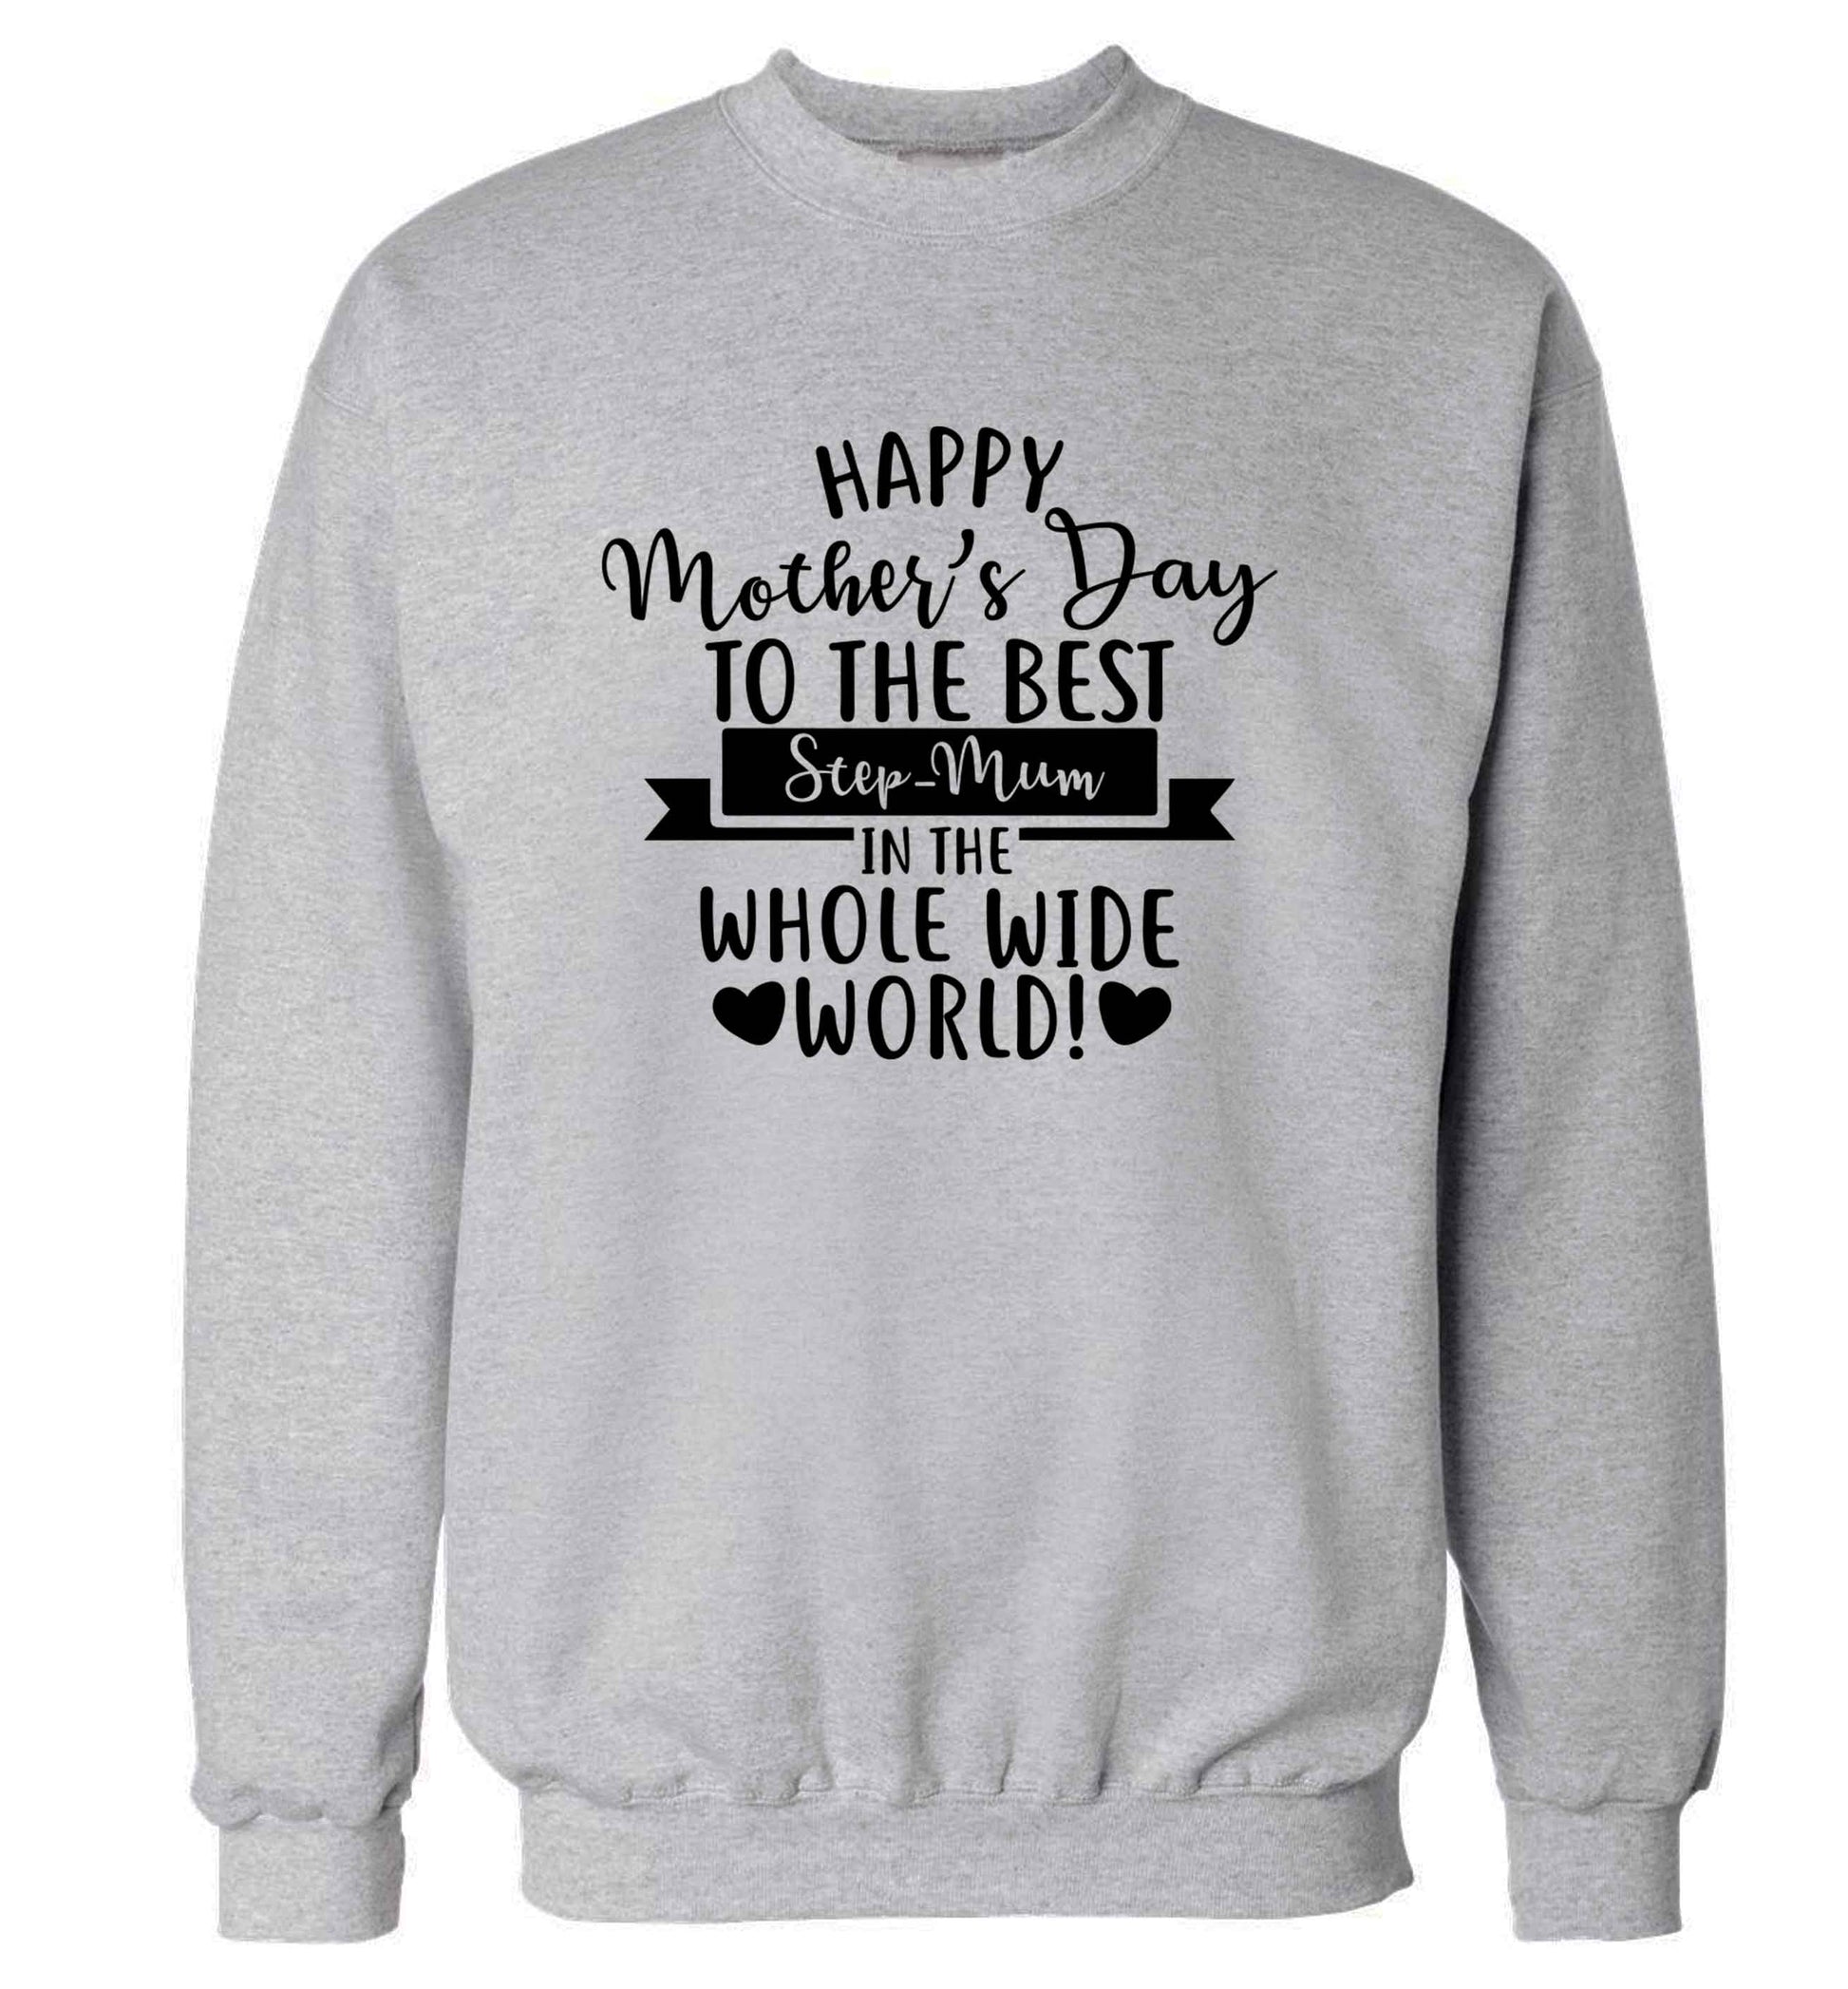 Happy mother's day to the best step-mum in the world adult's unisex grey sweater 2XL